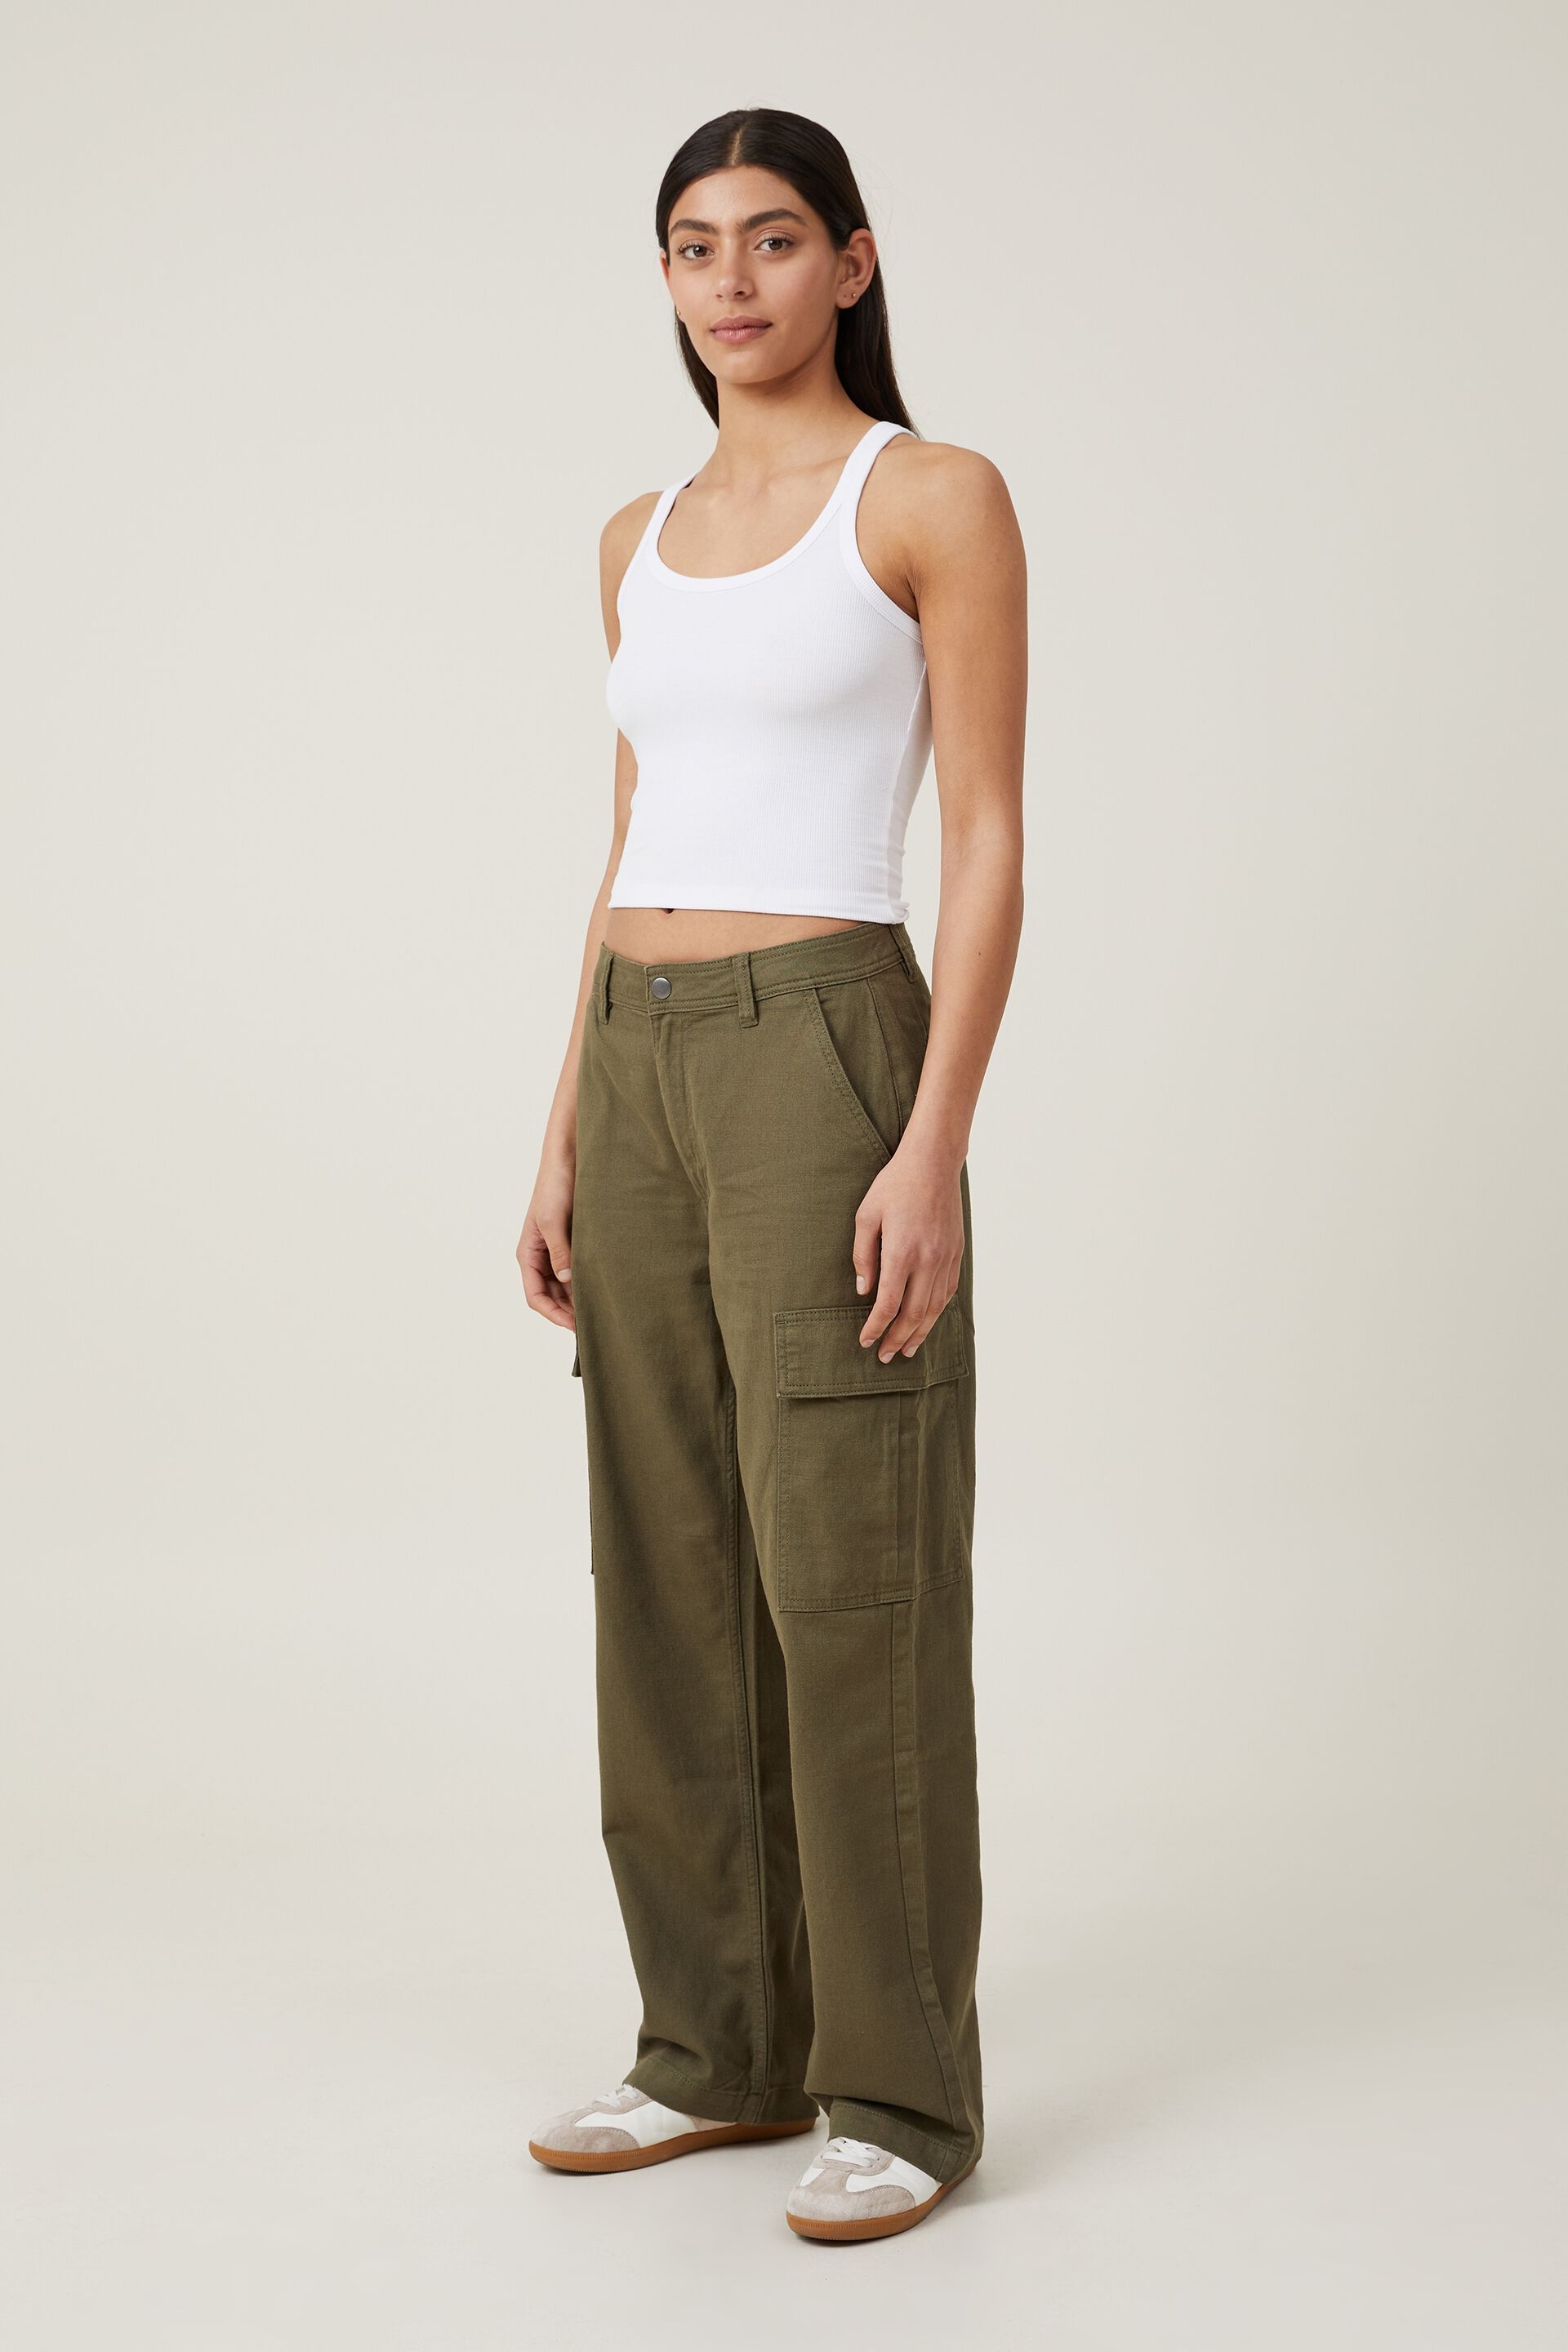 Buy Green Hip Womens Give Cargo Pants Every Bron Vick and Sally   PGCARR Online  Queensland Workwear Supplies